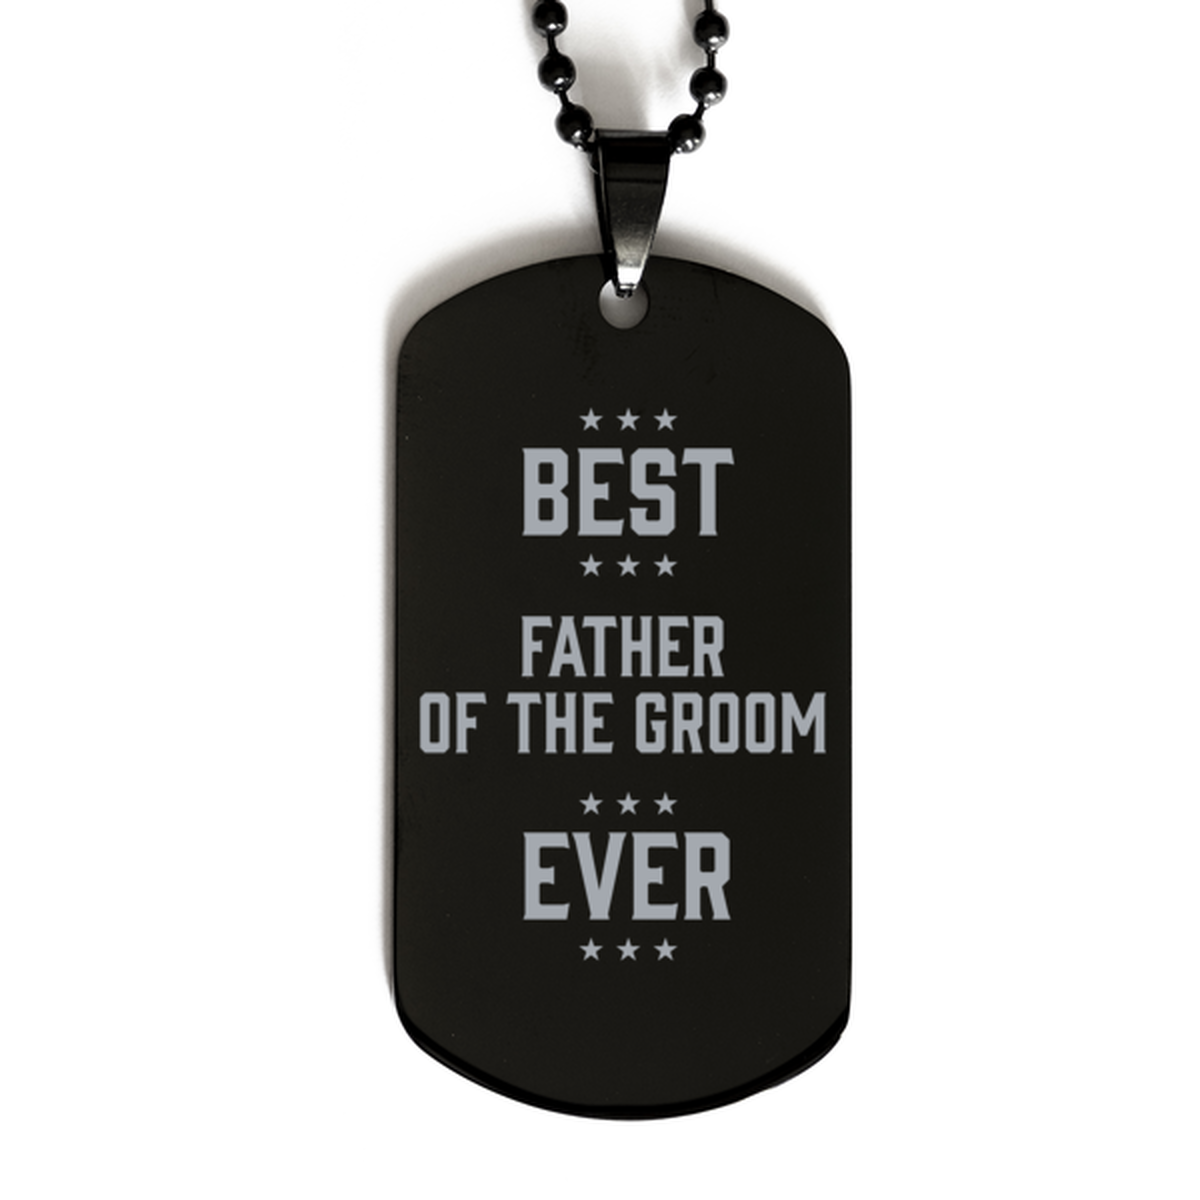 Best Father of the groom Ever Father of the groom Gifts, Funny Black Dog Tag For Father of the groom, Birthday Family Presents Engraved Necklace For Men